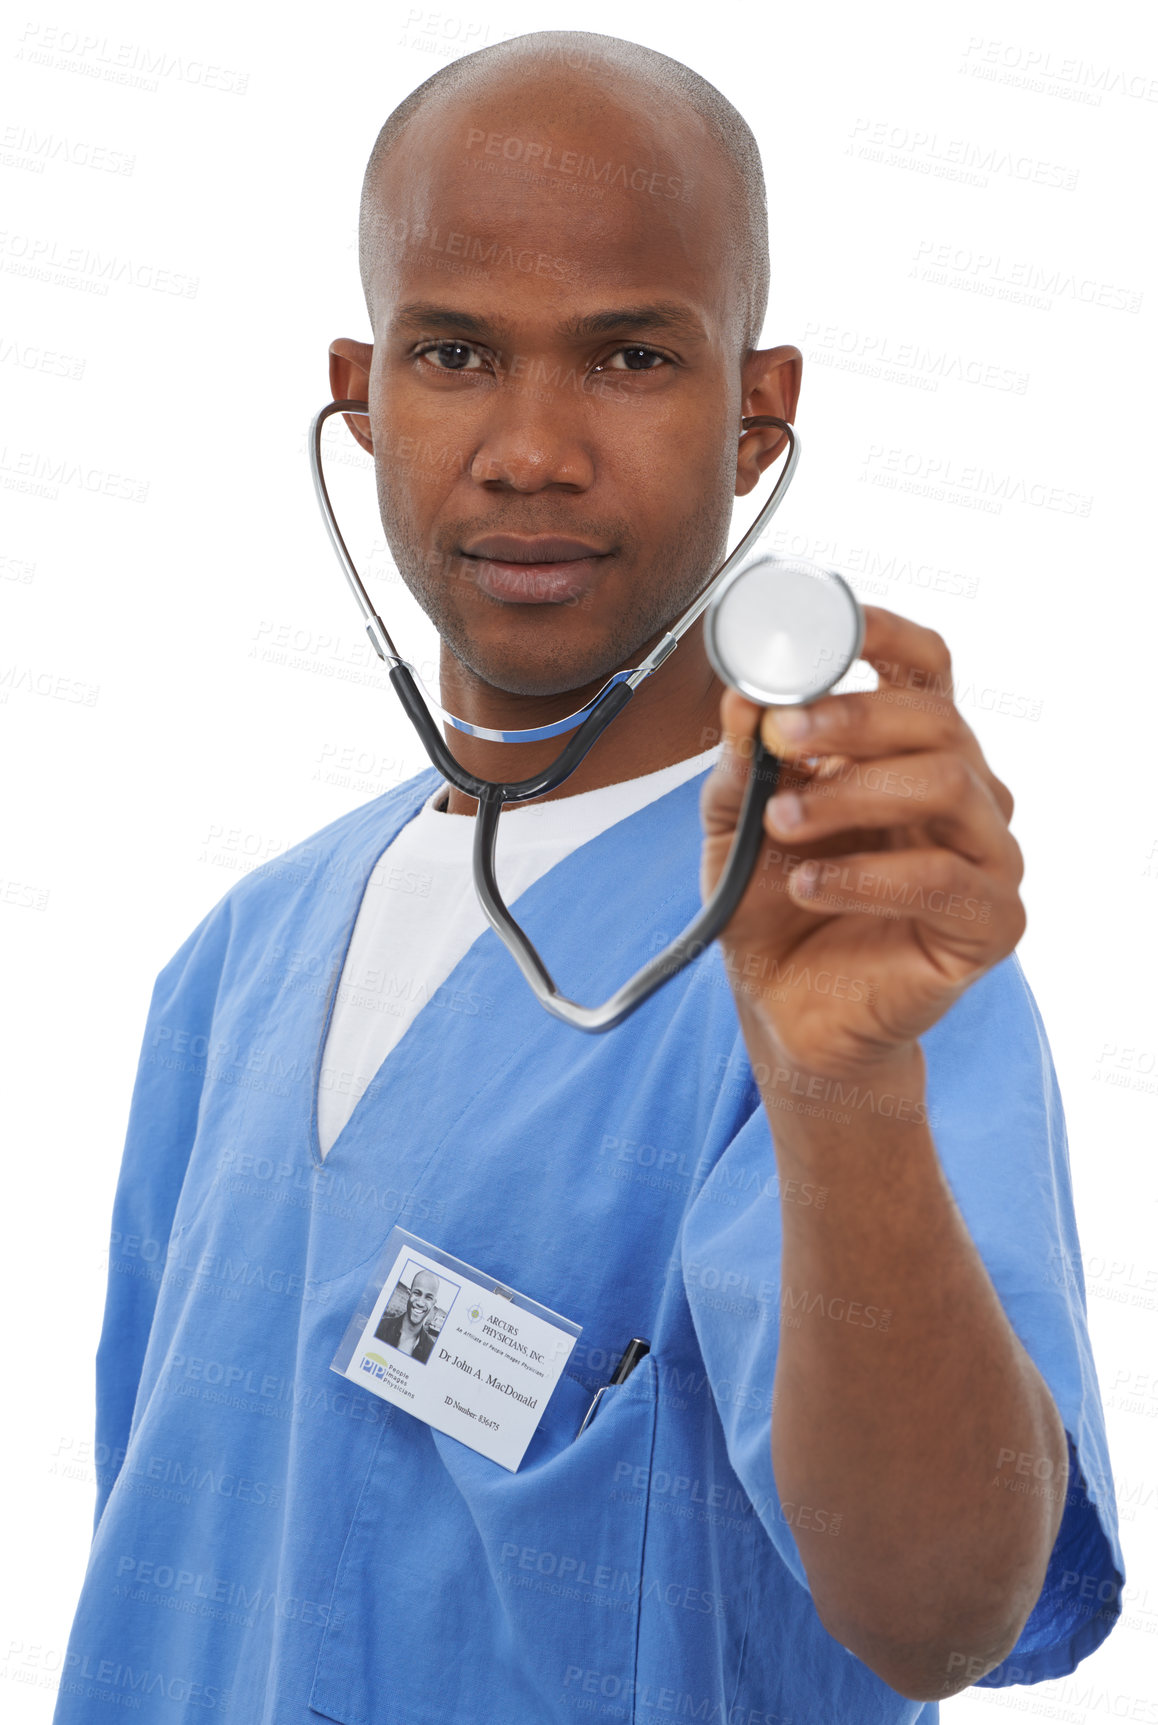 Buy stock photo Stethoscope, black man and studio portrait of surgeon for heartbeat, breathing or doctor service assessment. Healthcare, medical equipment and cardiologist with cardiology tools on white background